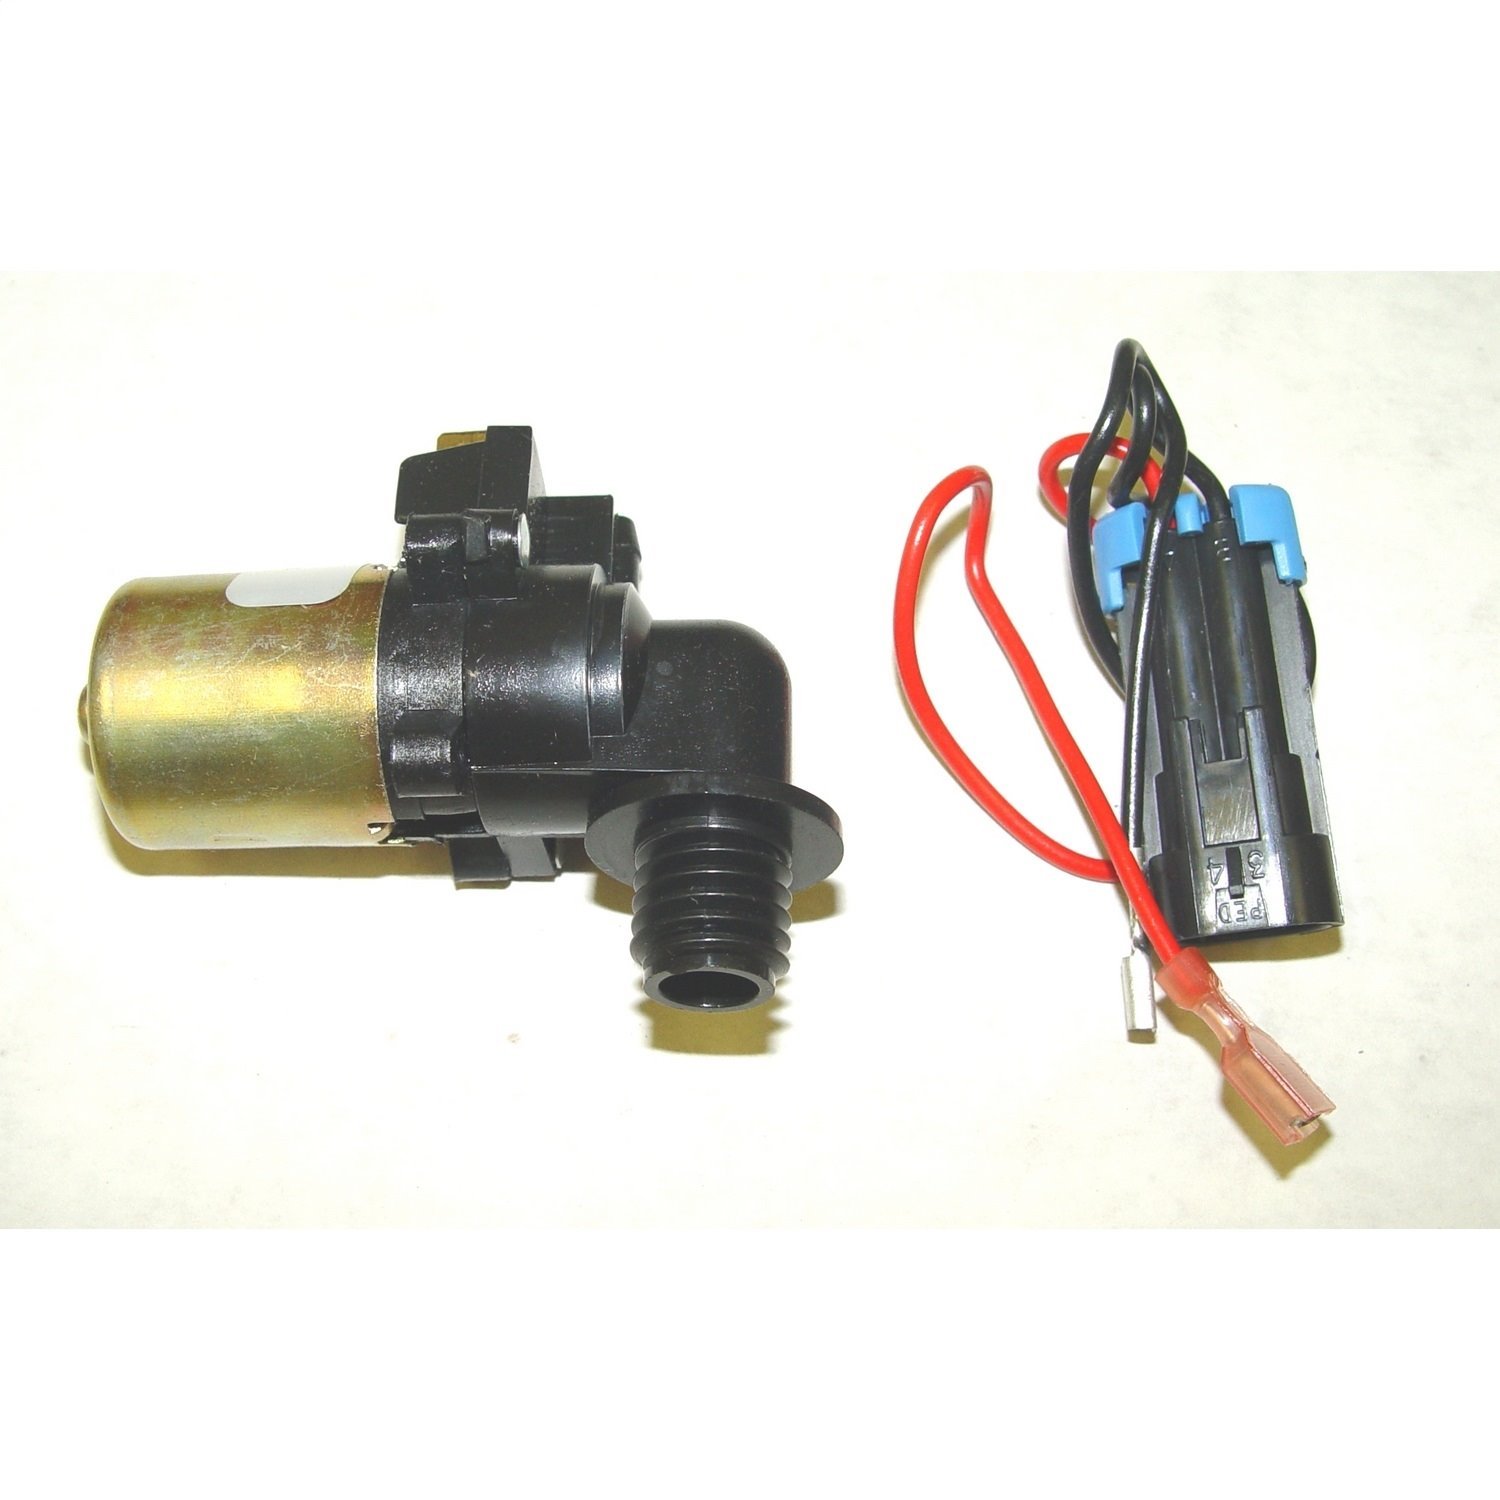 Replacement front windshield washer pump from Omix-ADA, Fits 93-98 Jeep Grand Cherokee ZJ and 90-95 Wrangler YJ